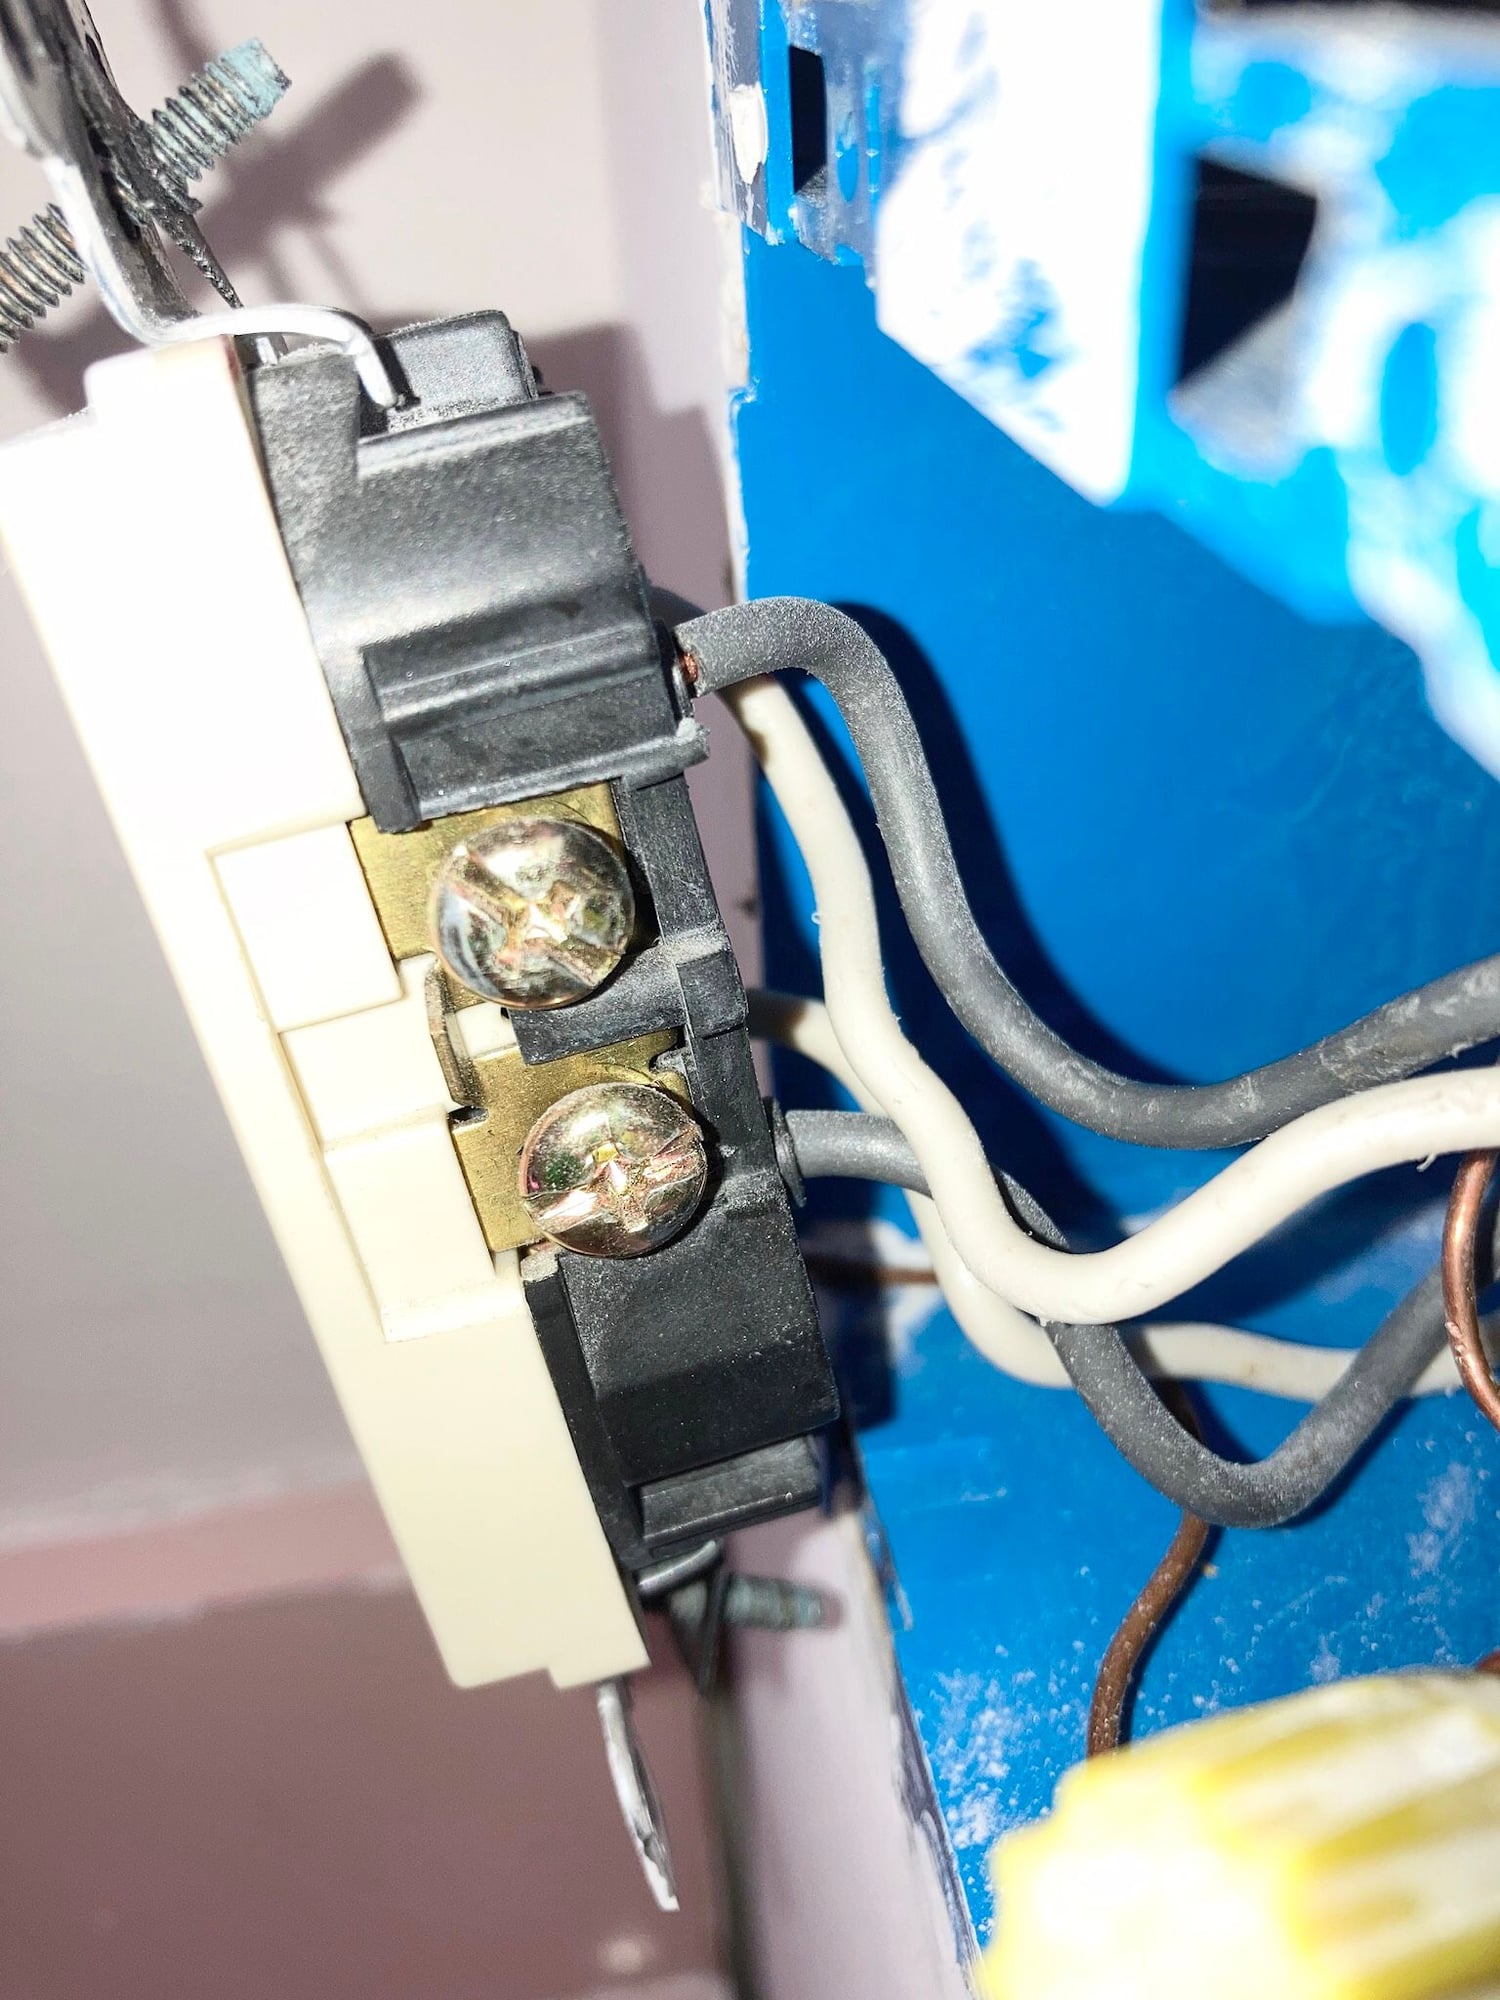 Wiring switch in same 2 gang box as recepticle - DoItYourself.com ...